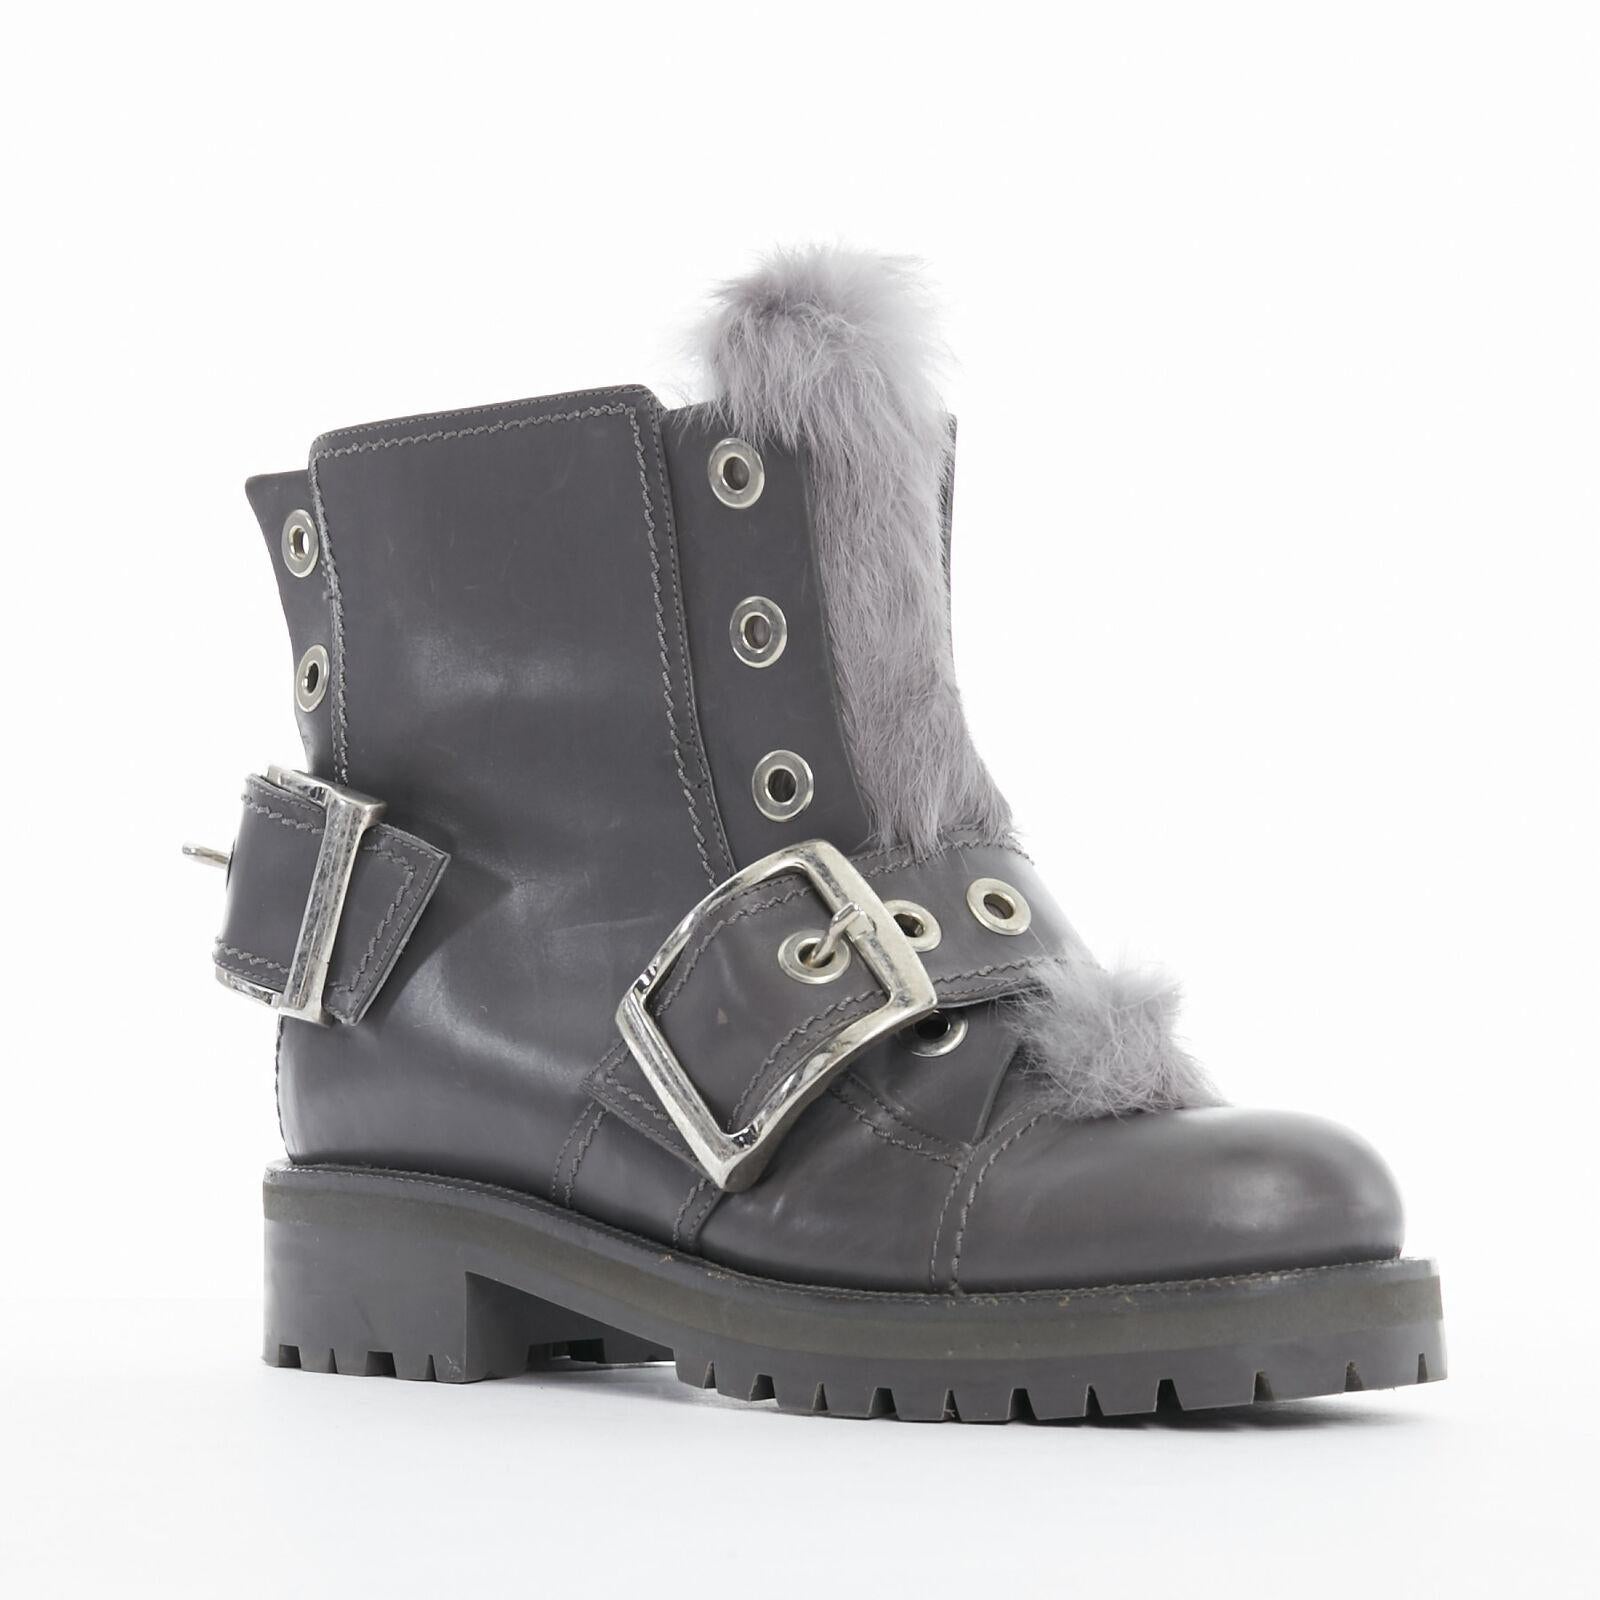 ALEXANDER MCQUEEN grey leather rabbit fur trimmed buckle combat boot EU38.5 
Reference: TGAS/A01325 
Brand: Alexander McQueen 
Designer: Sarah Burton 
Material: Leather 
Color: Grey 
Pattern: Solid 
Closure: Pull on 
Extra Detail: Rabbit fur